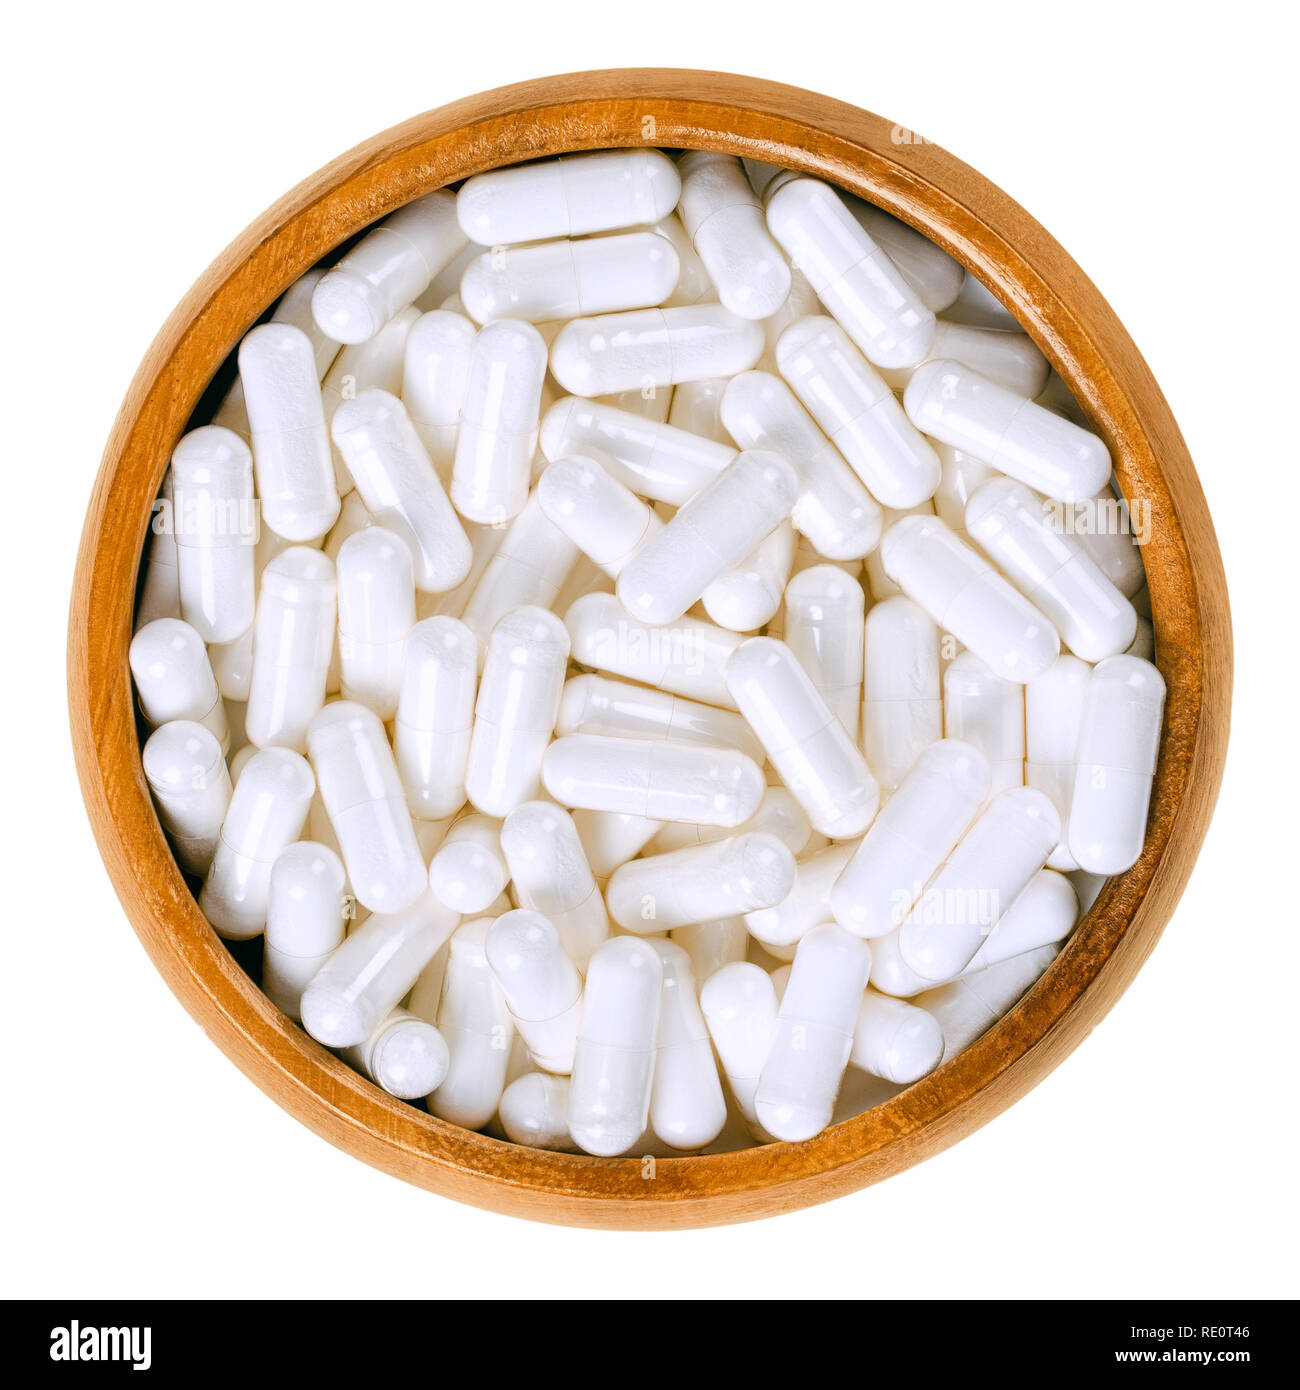 White food supplement capsules in wooden bowl. Hard shelled capsules, filled with powder, for example vitamin B12, cobalamin. Stock Photo